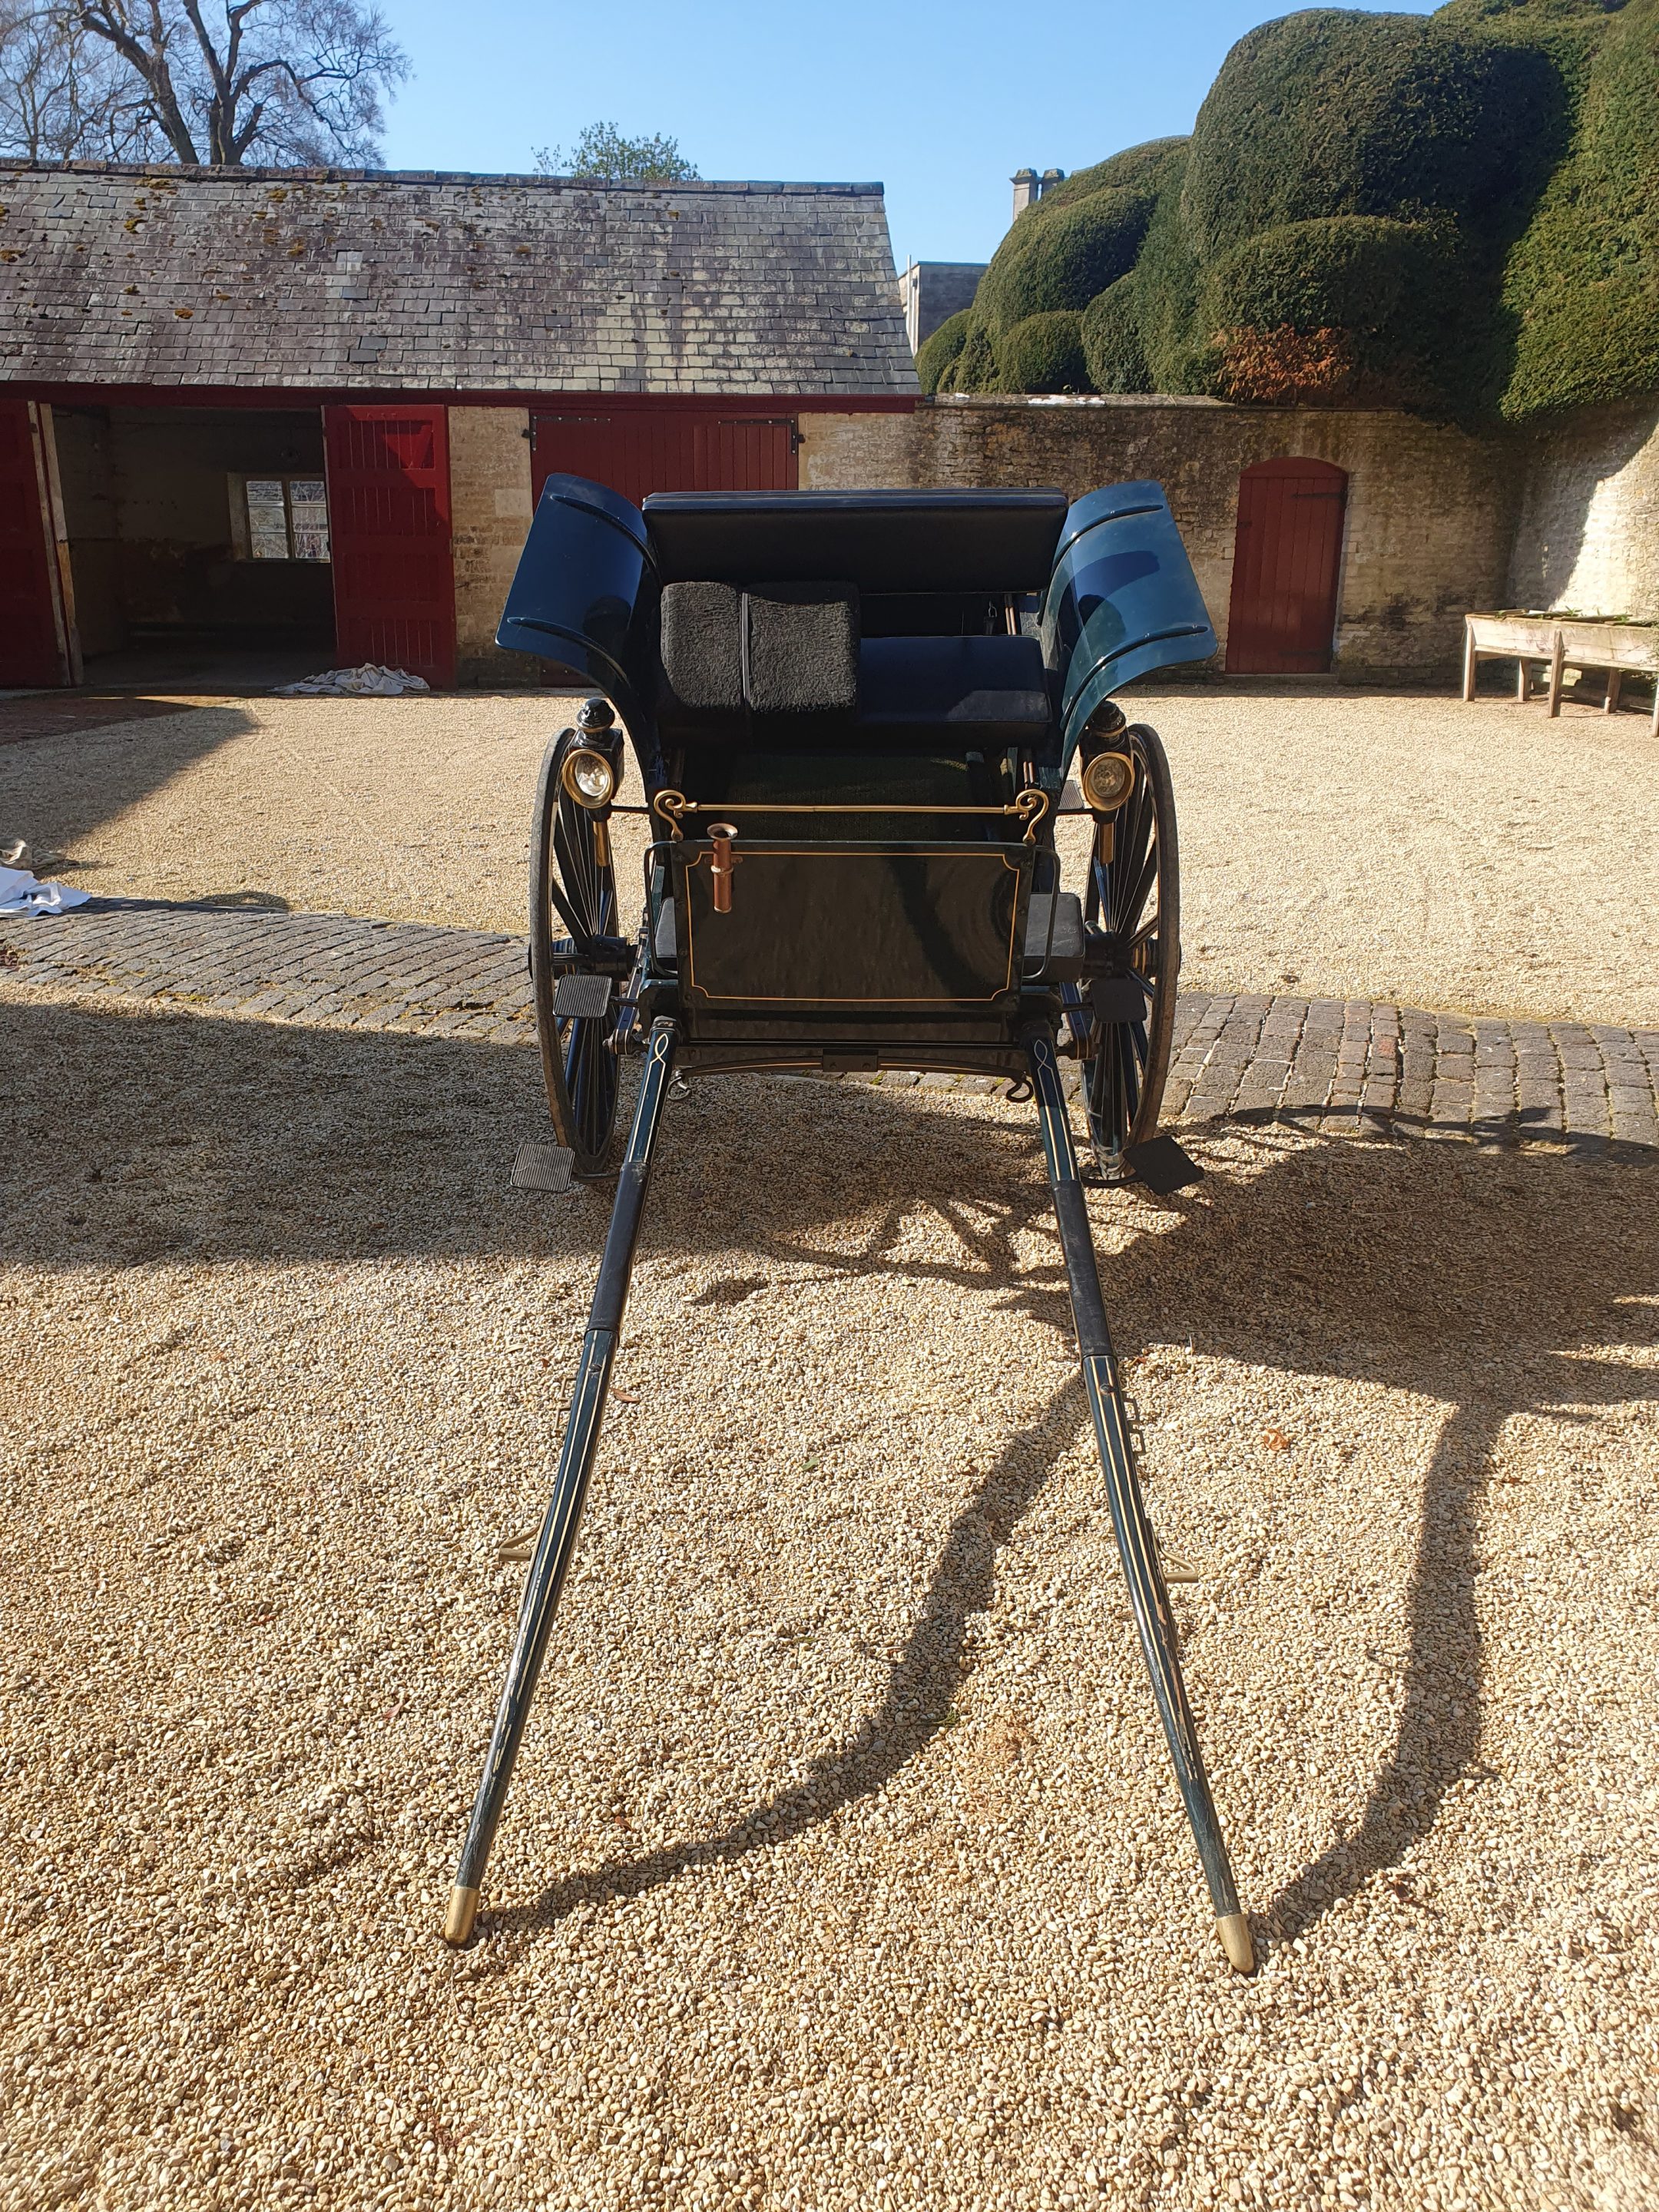 RALLI CAR built by Weston & Son of Cheltenham to suit 14.2hh. Painted dark blue with gold lining, - Image 3 of 4